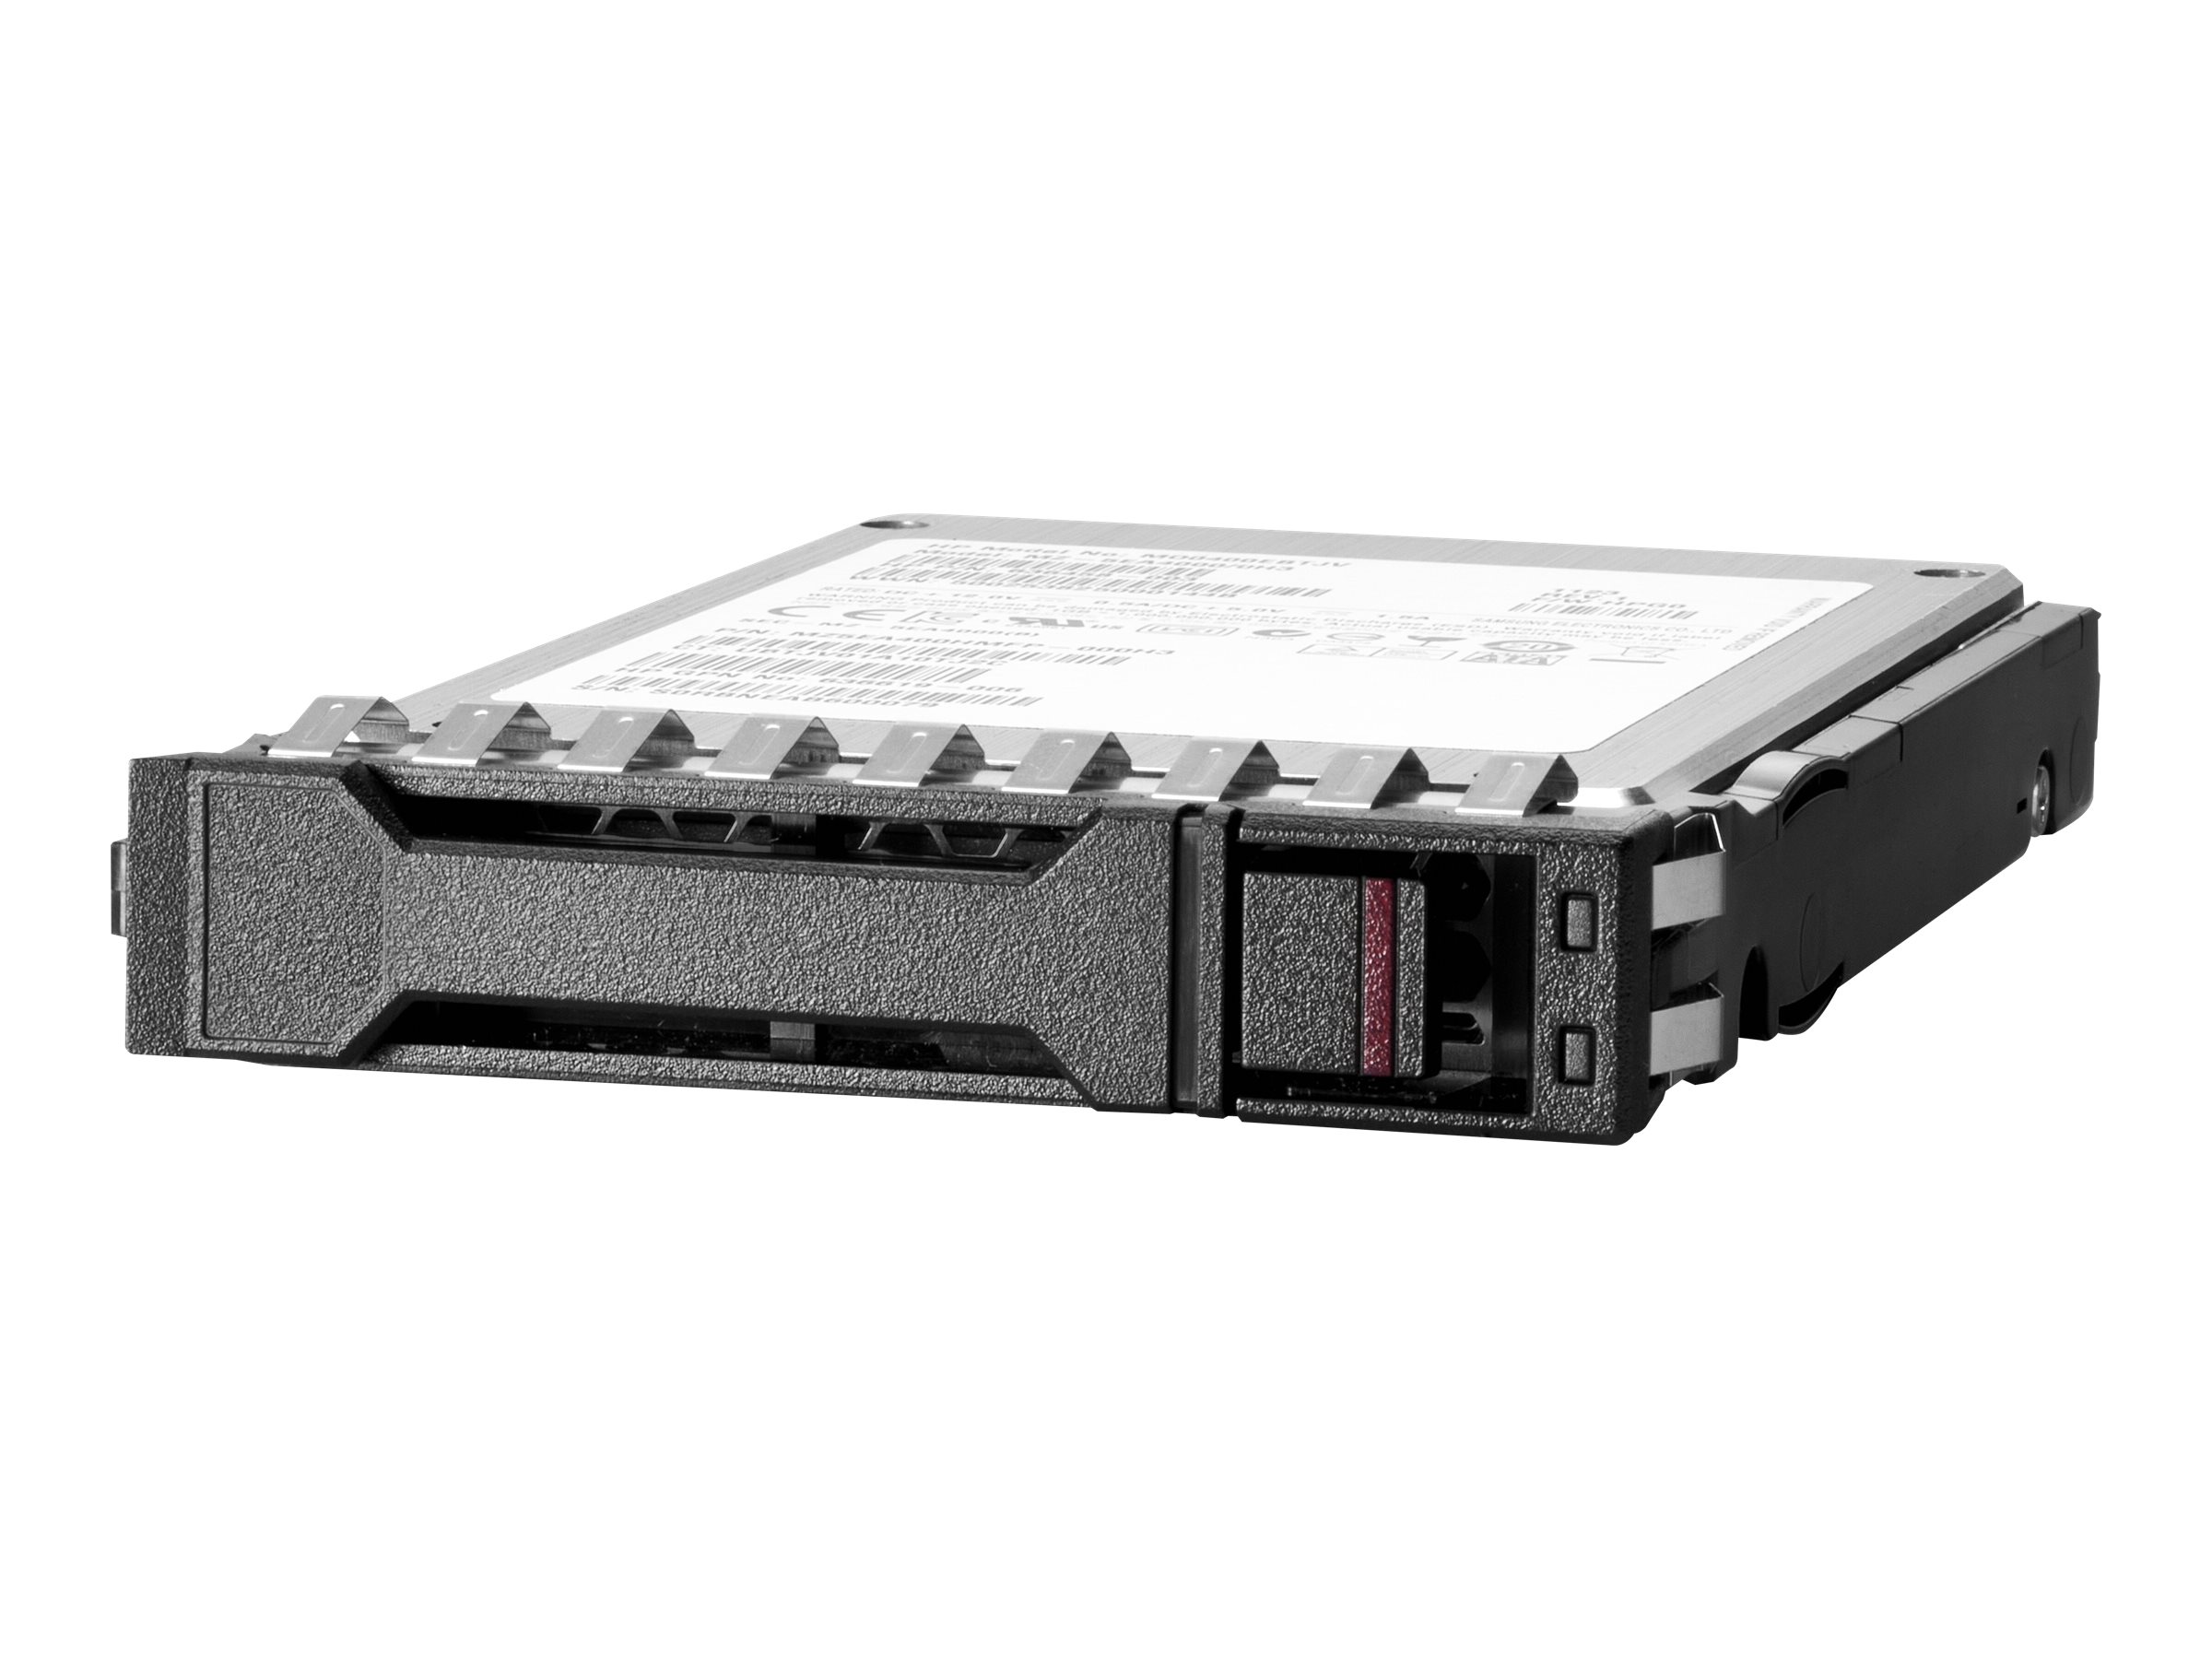 HPE Read Intensive High Performance P4510 - SSD - Read Intensive, High Performance - 2 TB - Hot-Swap - 2.5